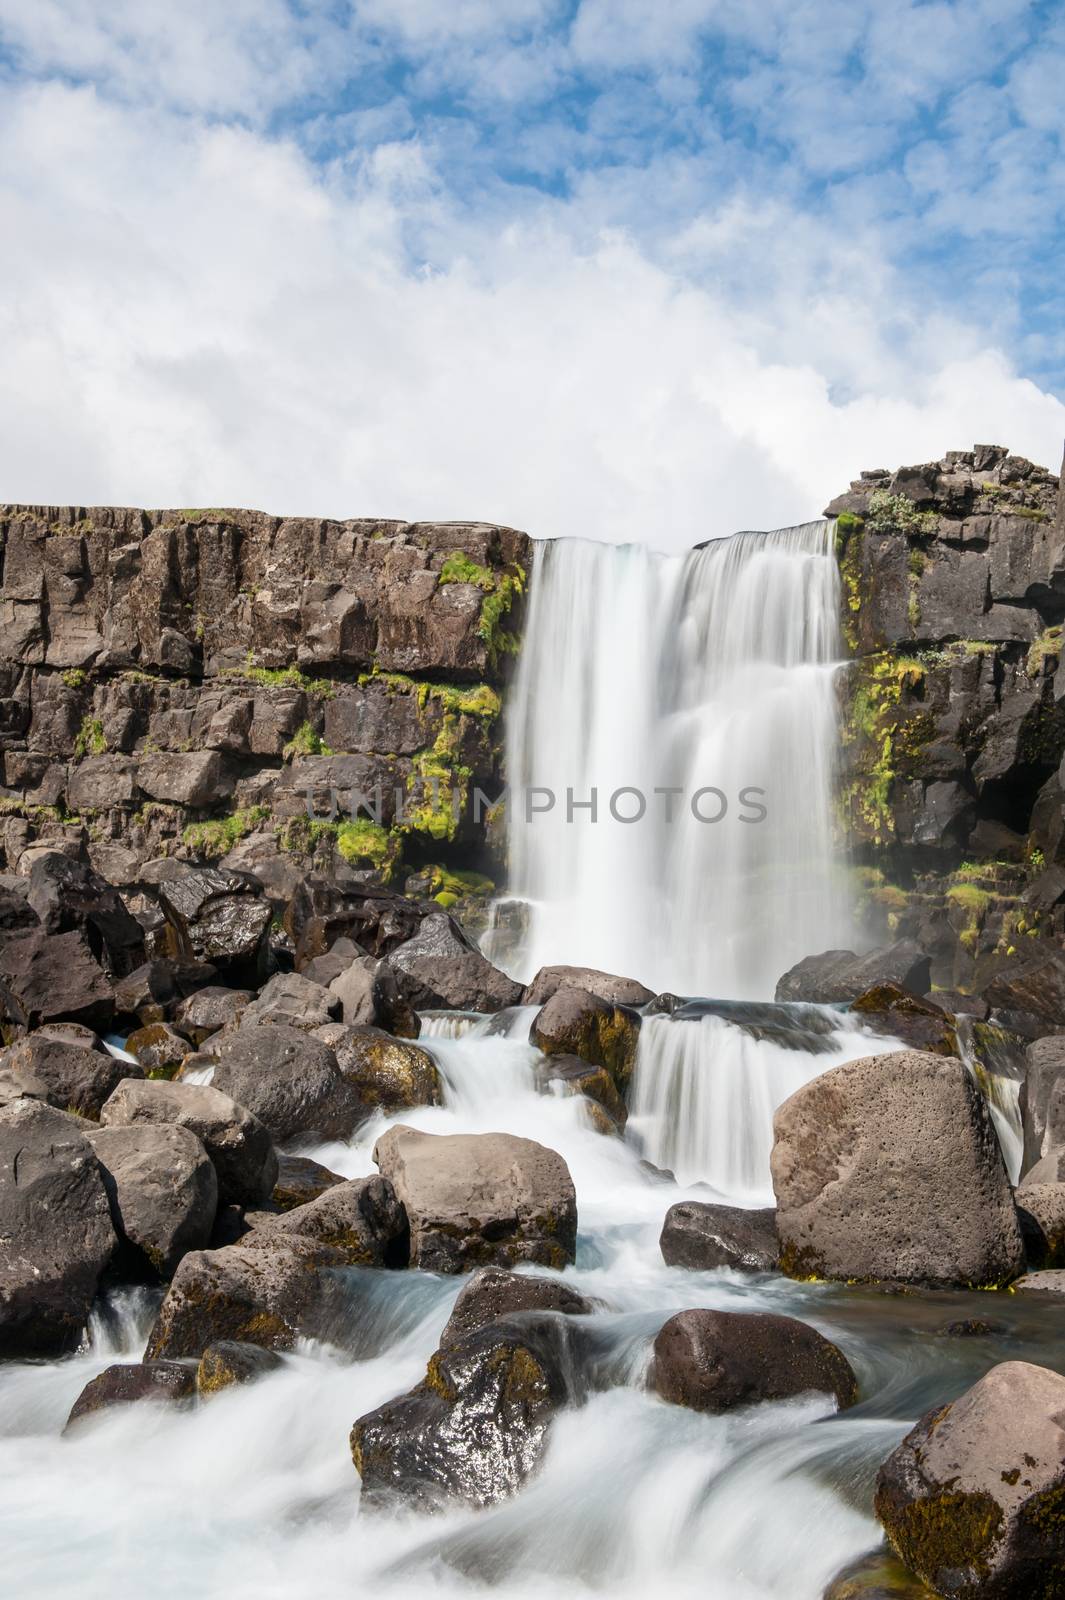 Beautiful Icelandic waterfall Oxararfoss. It is located on the West of the island in the Thingvellir national park